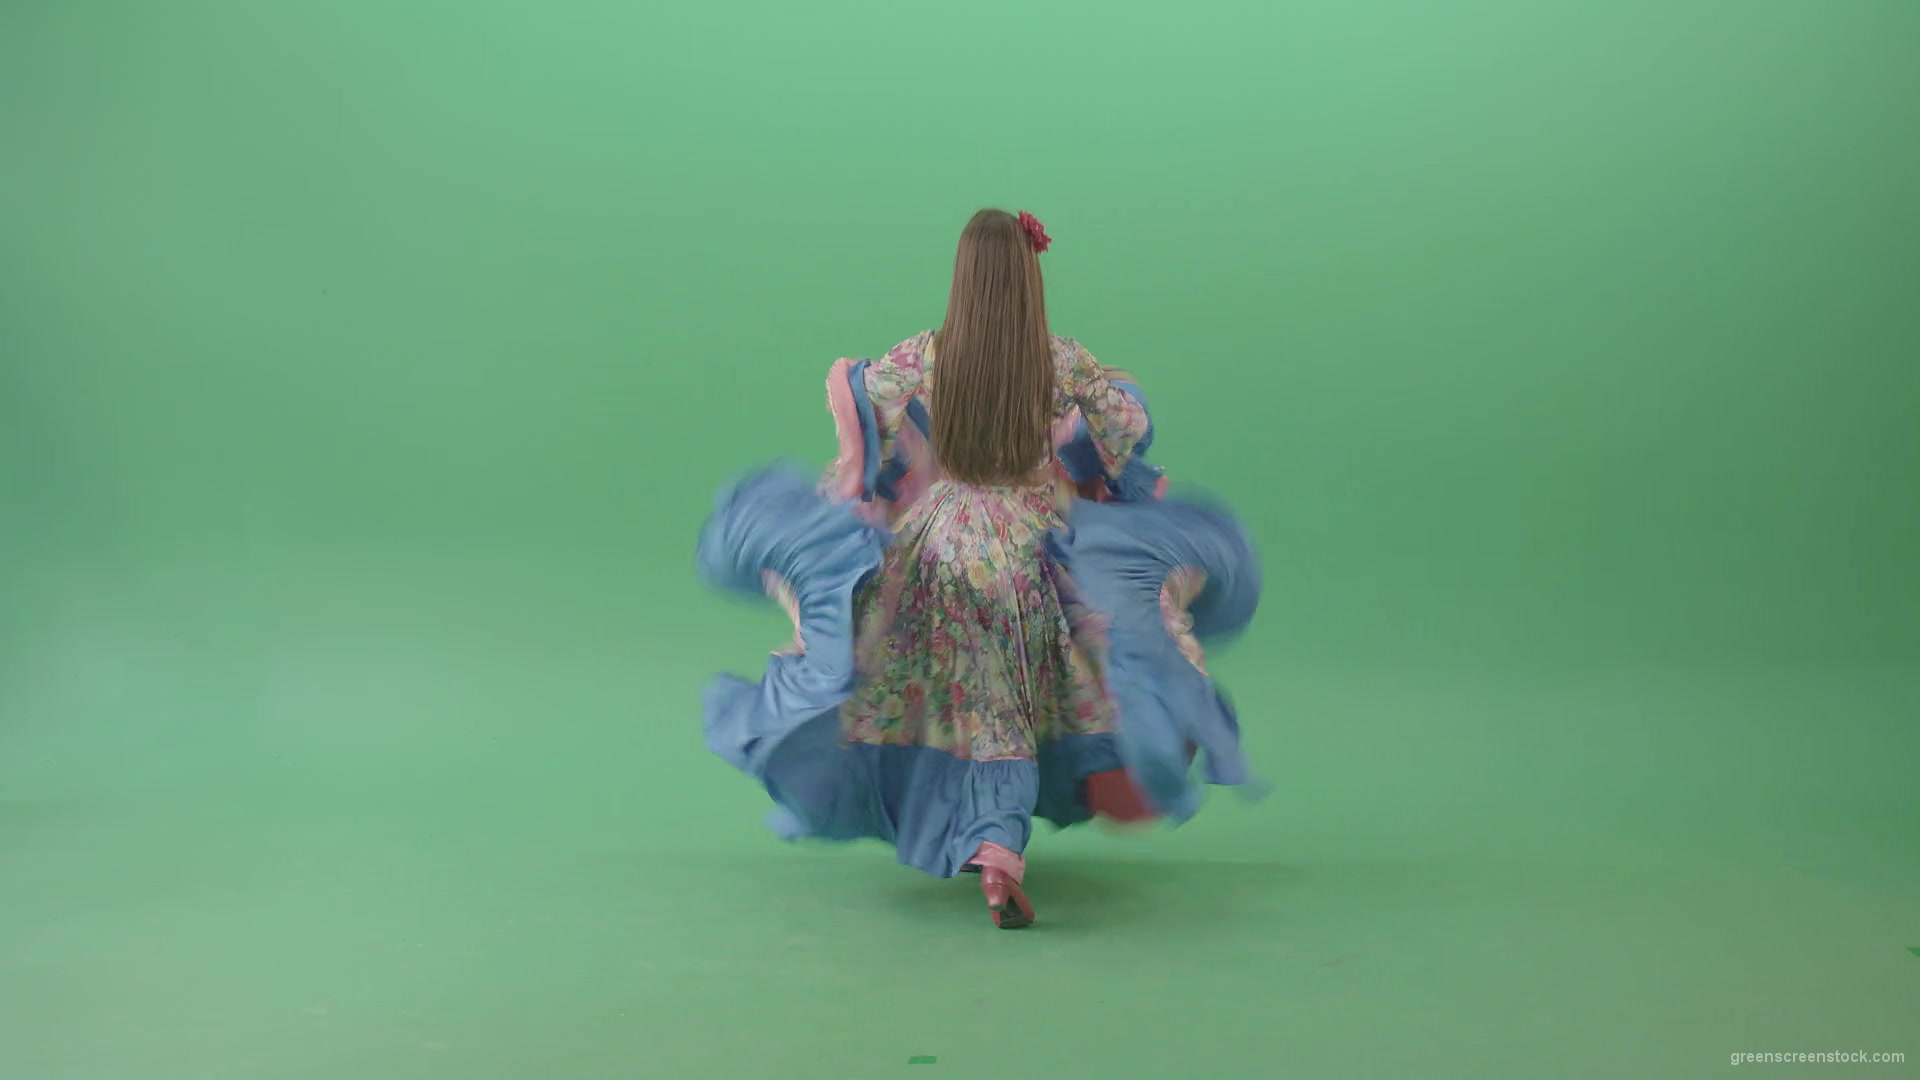 Dancing-gipsy-girl-waving-balkan-dress-from-back-view-isolated-on-green-screen-4K-Video-Stock-Footage-1920_007 Green Screen Stock